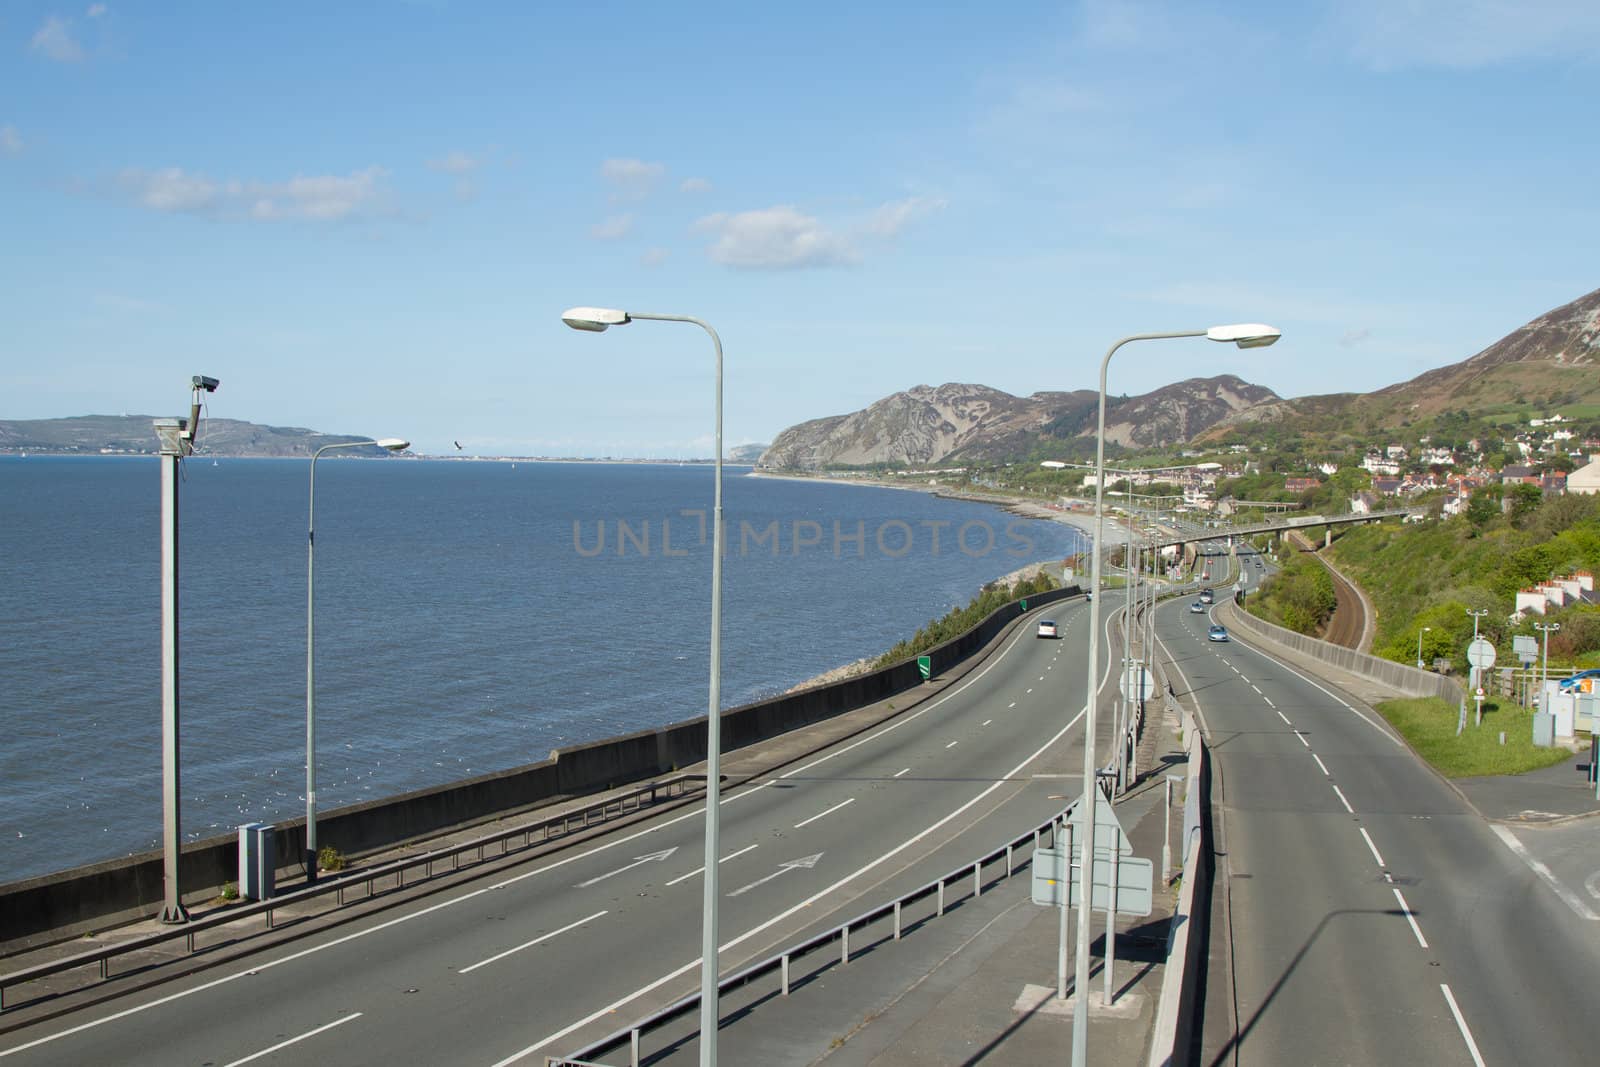 The A55 at Penmaenmawr, North Wales, UK, looking towards Llandudno and the Great Orme.